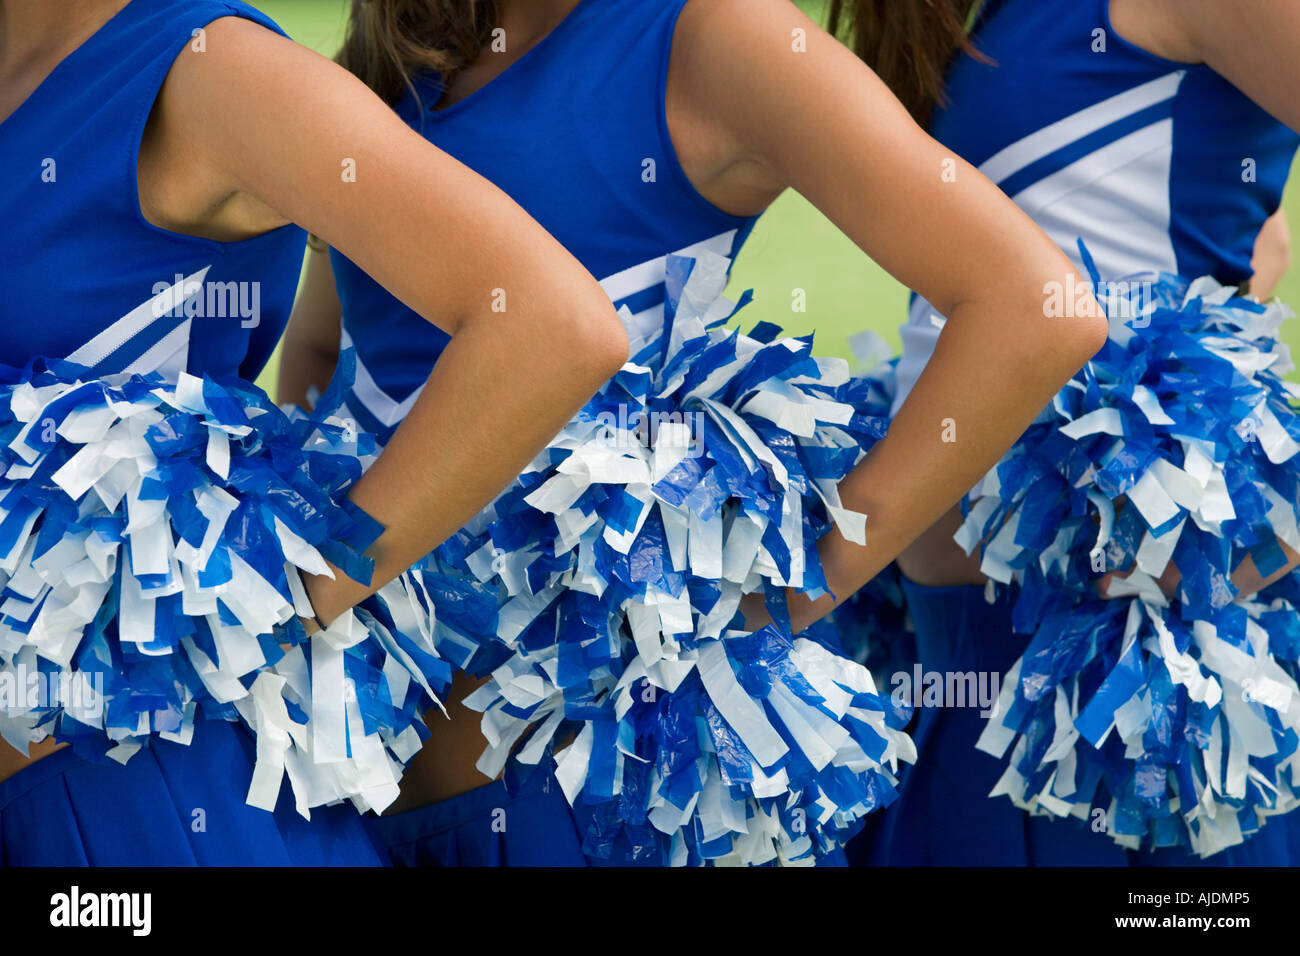 Cheerleaders Holding Pom Poms Mid Section Close Up Photo Stock Alamy